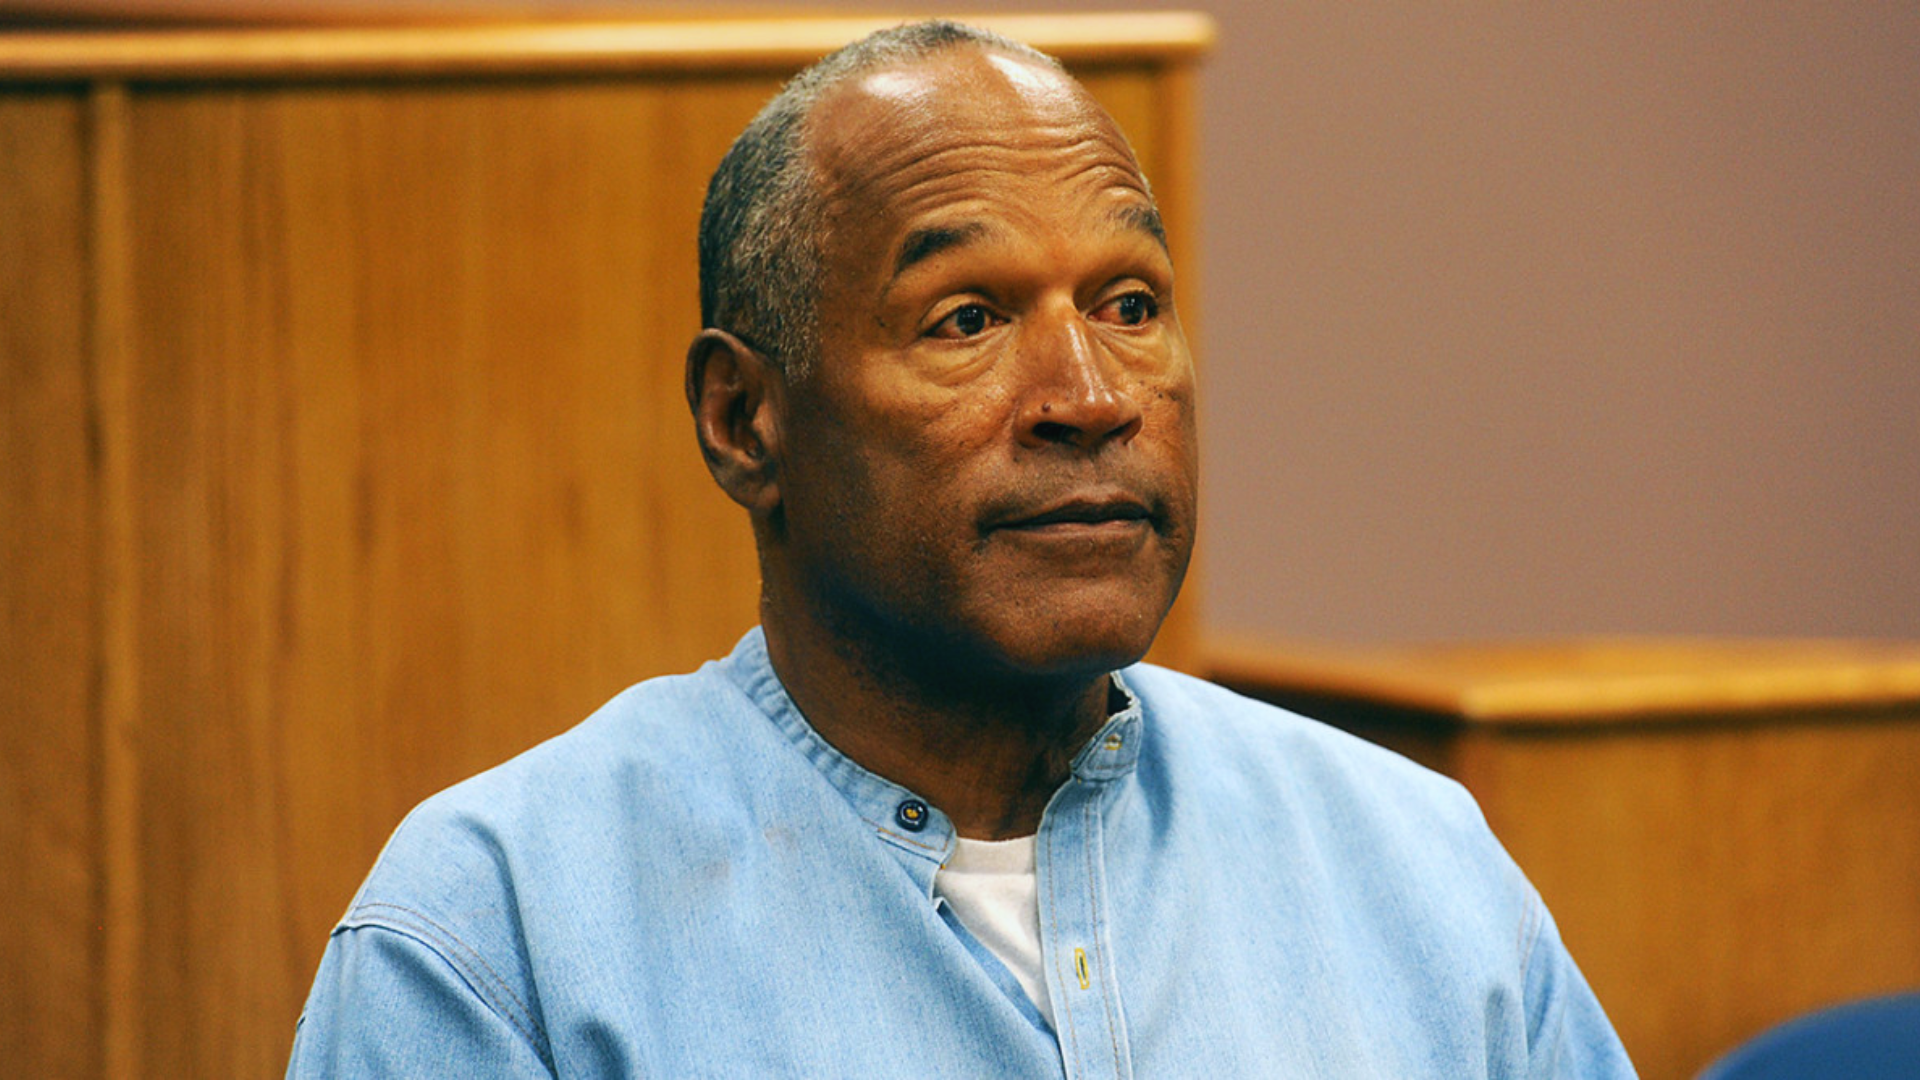 How Did OJ Simpson Die? Former NFL Star Was Aquitted In ‘Trial Of The Century’ Case After Getting Accused Of Murdering Wife